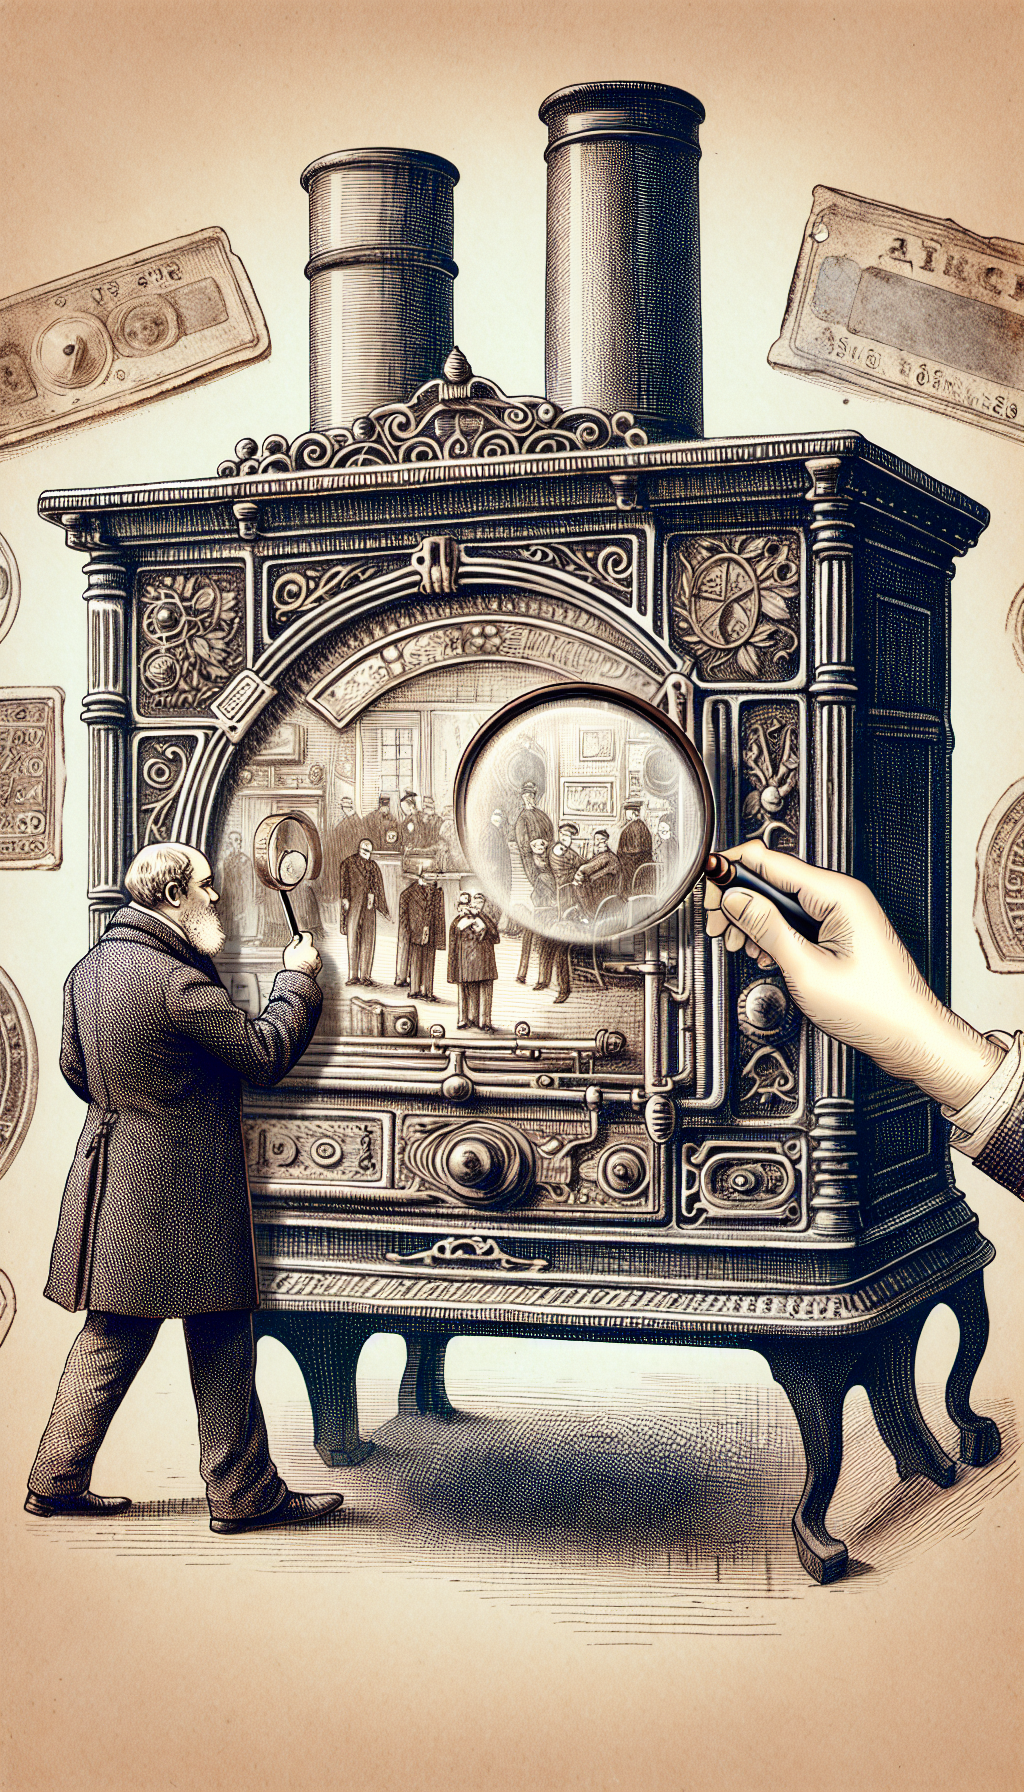 A detailed ink drawing depicts an antiquarian, magnifying glass in hand, peering at intricate maker's marks etched onto a vintage parlor stove's iron façade. The stove's ornate details are semi-transparent, revealing historical scenes within, while faded price tags swirl around, symbolizing the evolving value of such antiques—each style shift highlighting different historical eras signified by the marks.